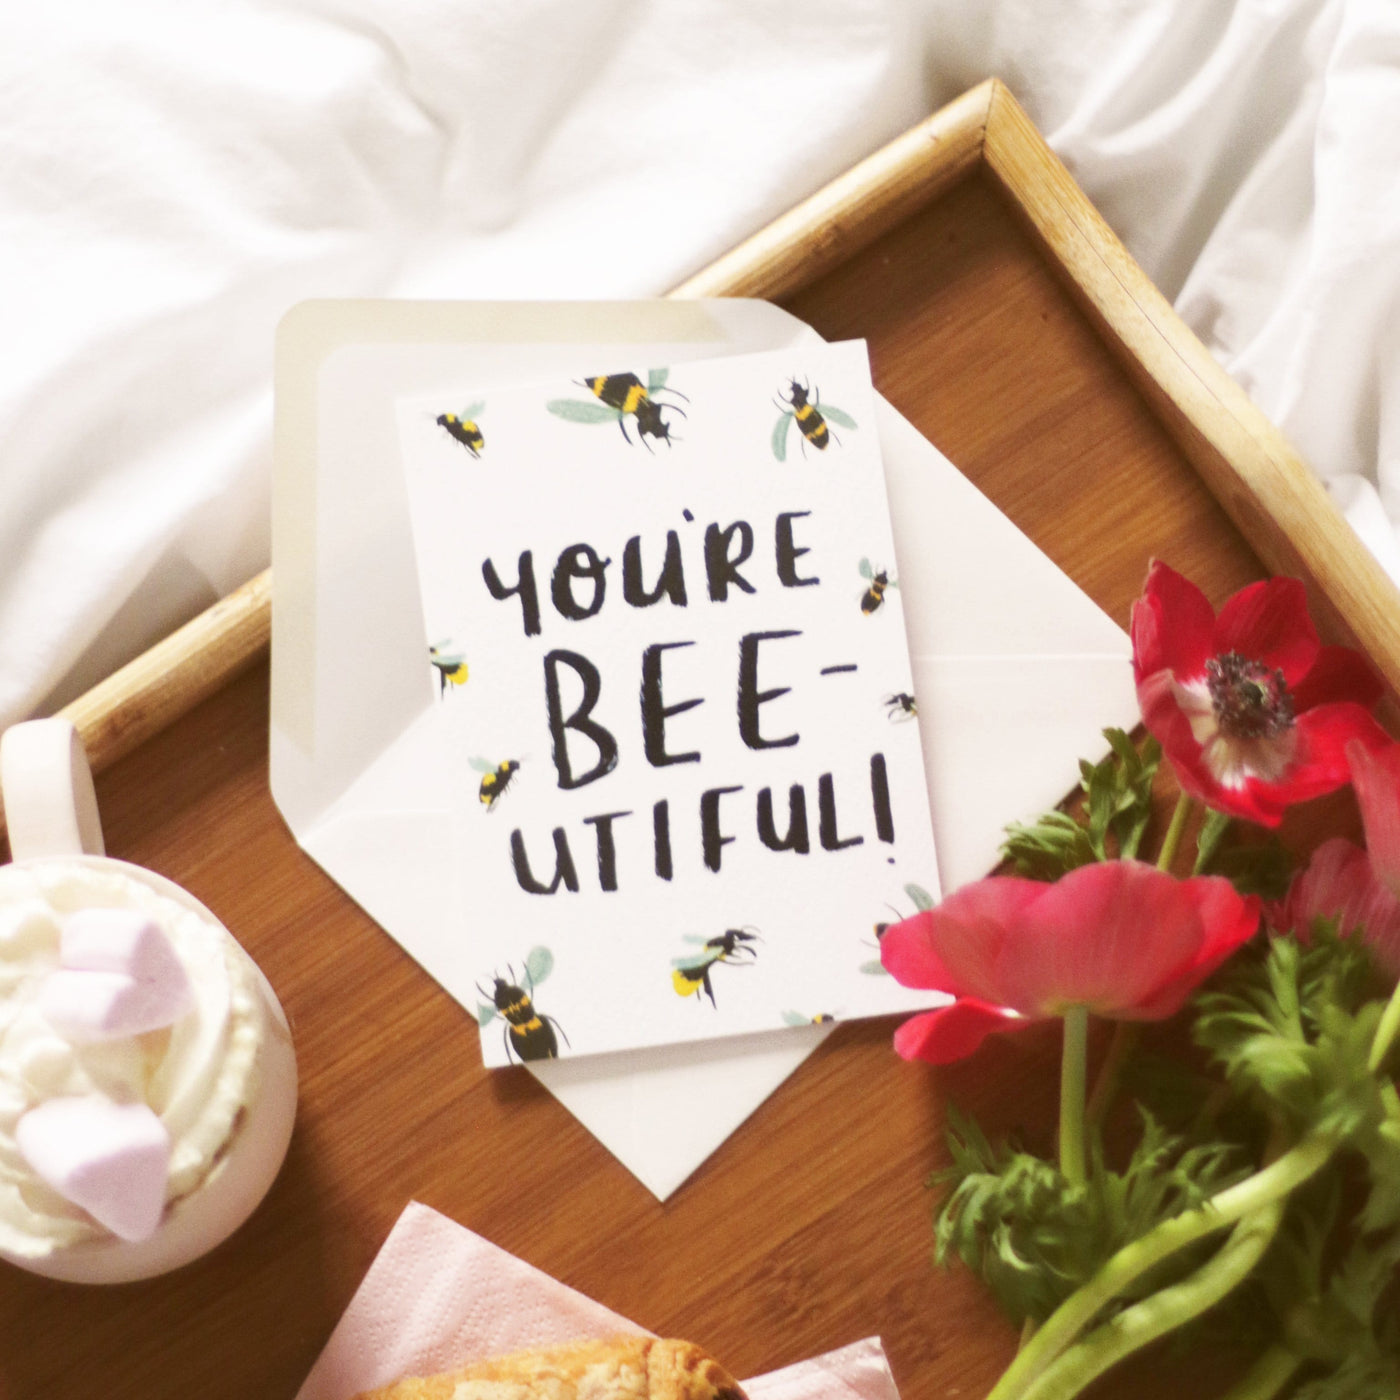 Hand Lettered Greeting Card Reading You're Beeutiful With Illustrated Bees With An Oyster Envelope On A Wooden Tray With A Hot Chocolate And Flowers - Annie Dornan Smith